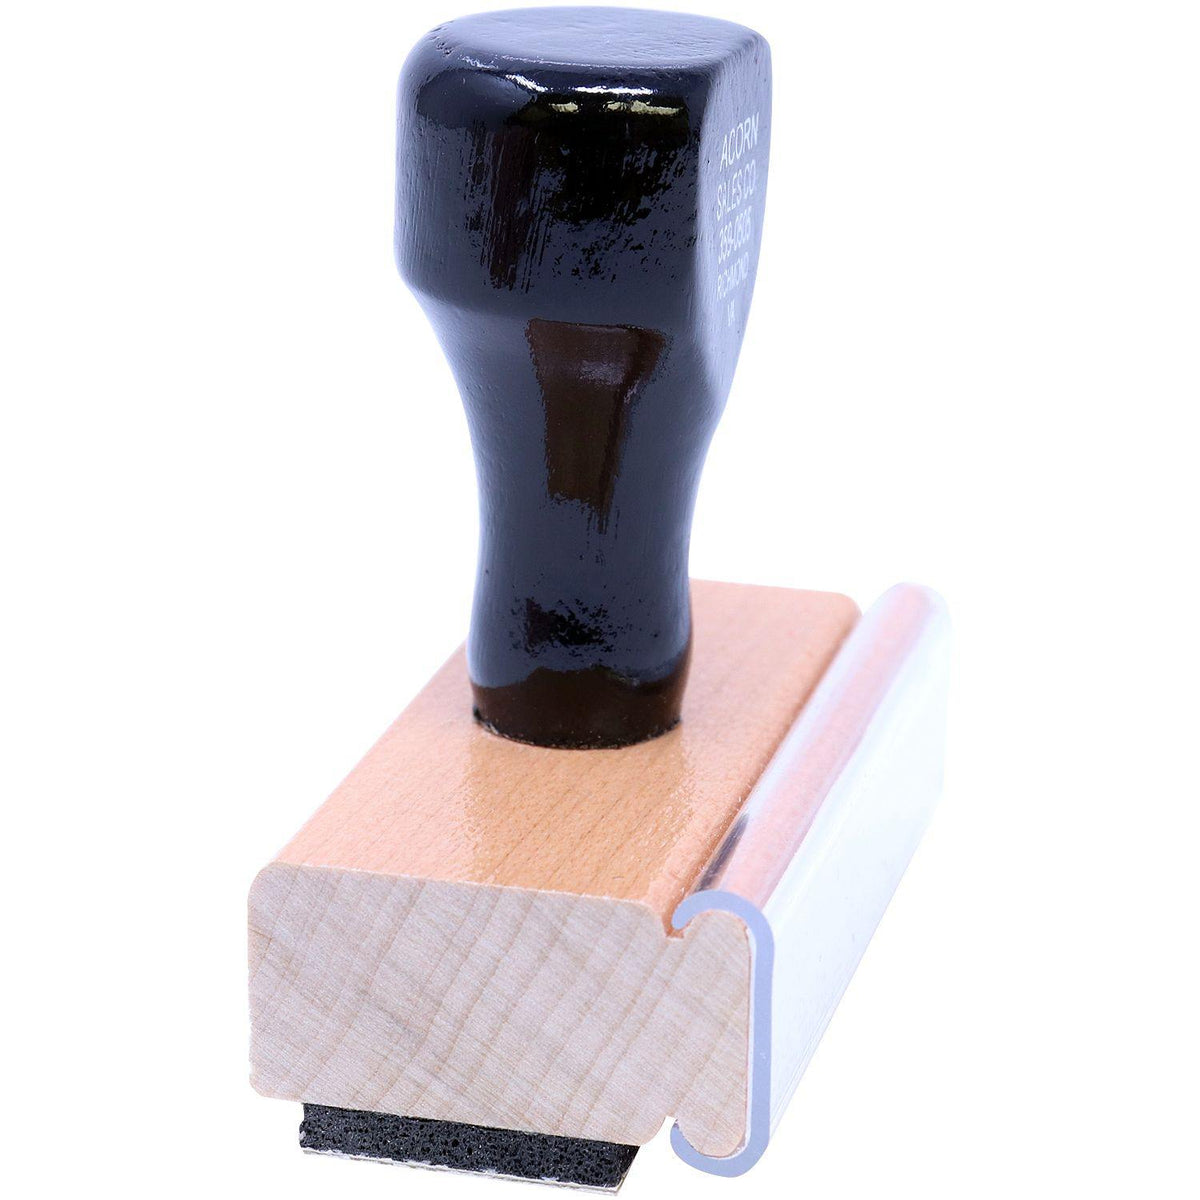 Side View of Bold Recibido Rubber Stamp at an Angle